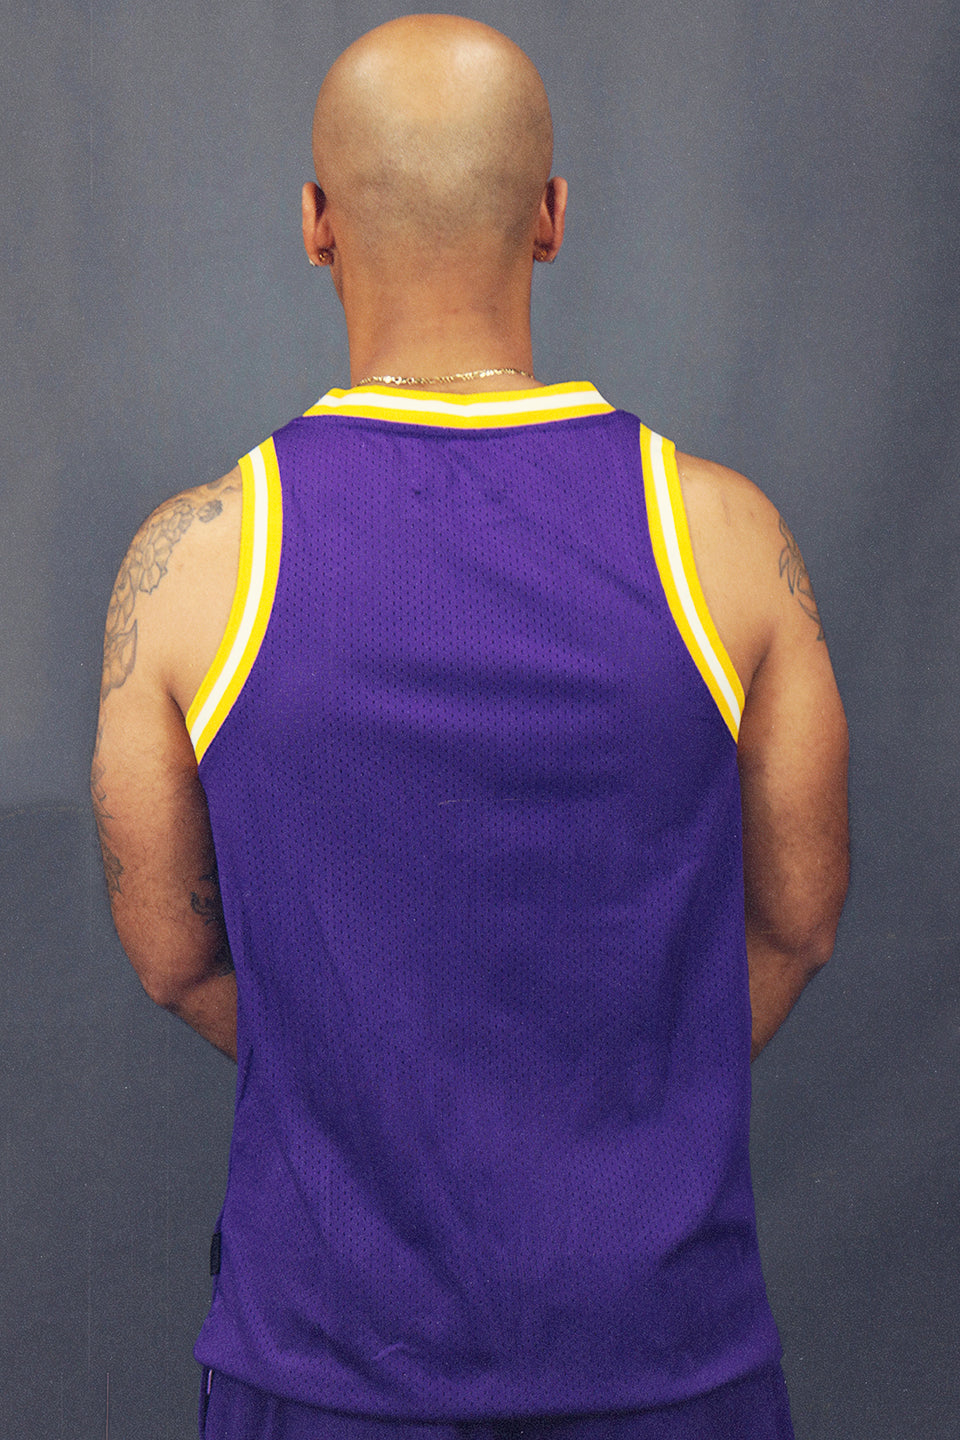 Back of the Men's Sleeveless Basketball Shirt Muscle Workout Purple Los Angeles Mesh Tank Top